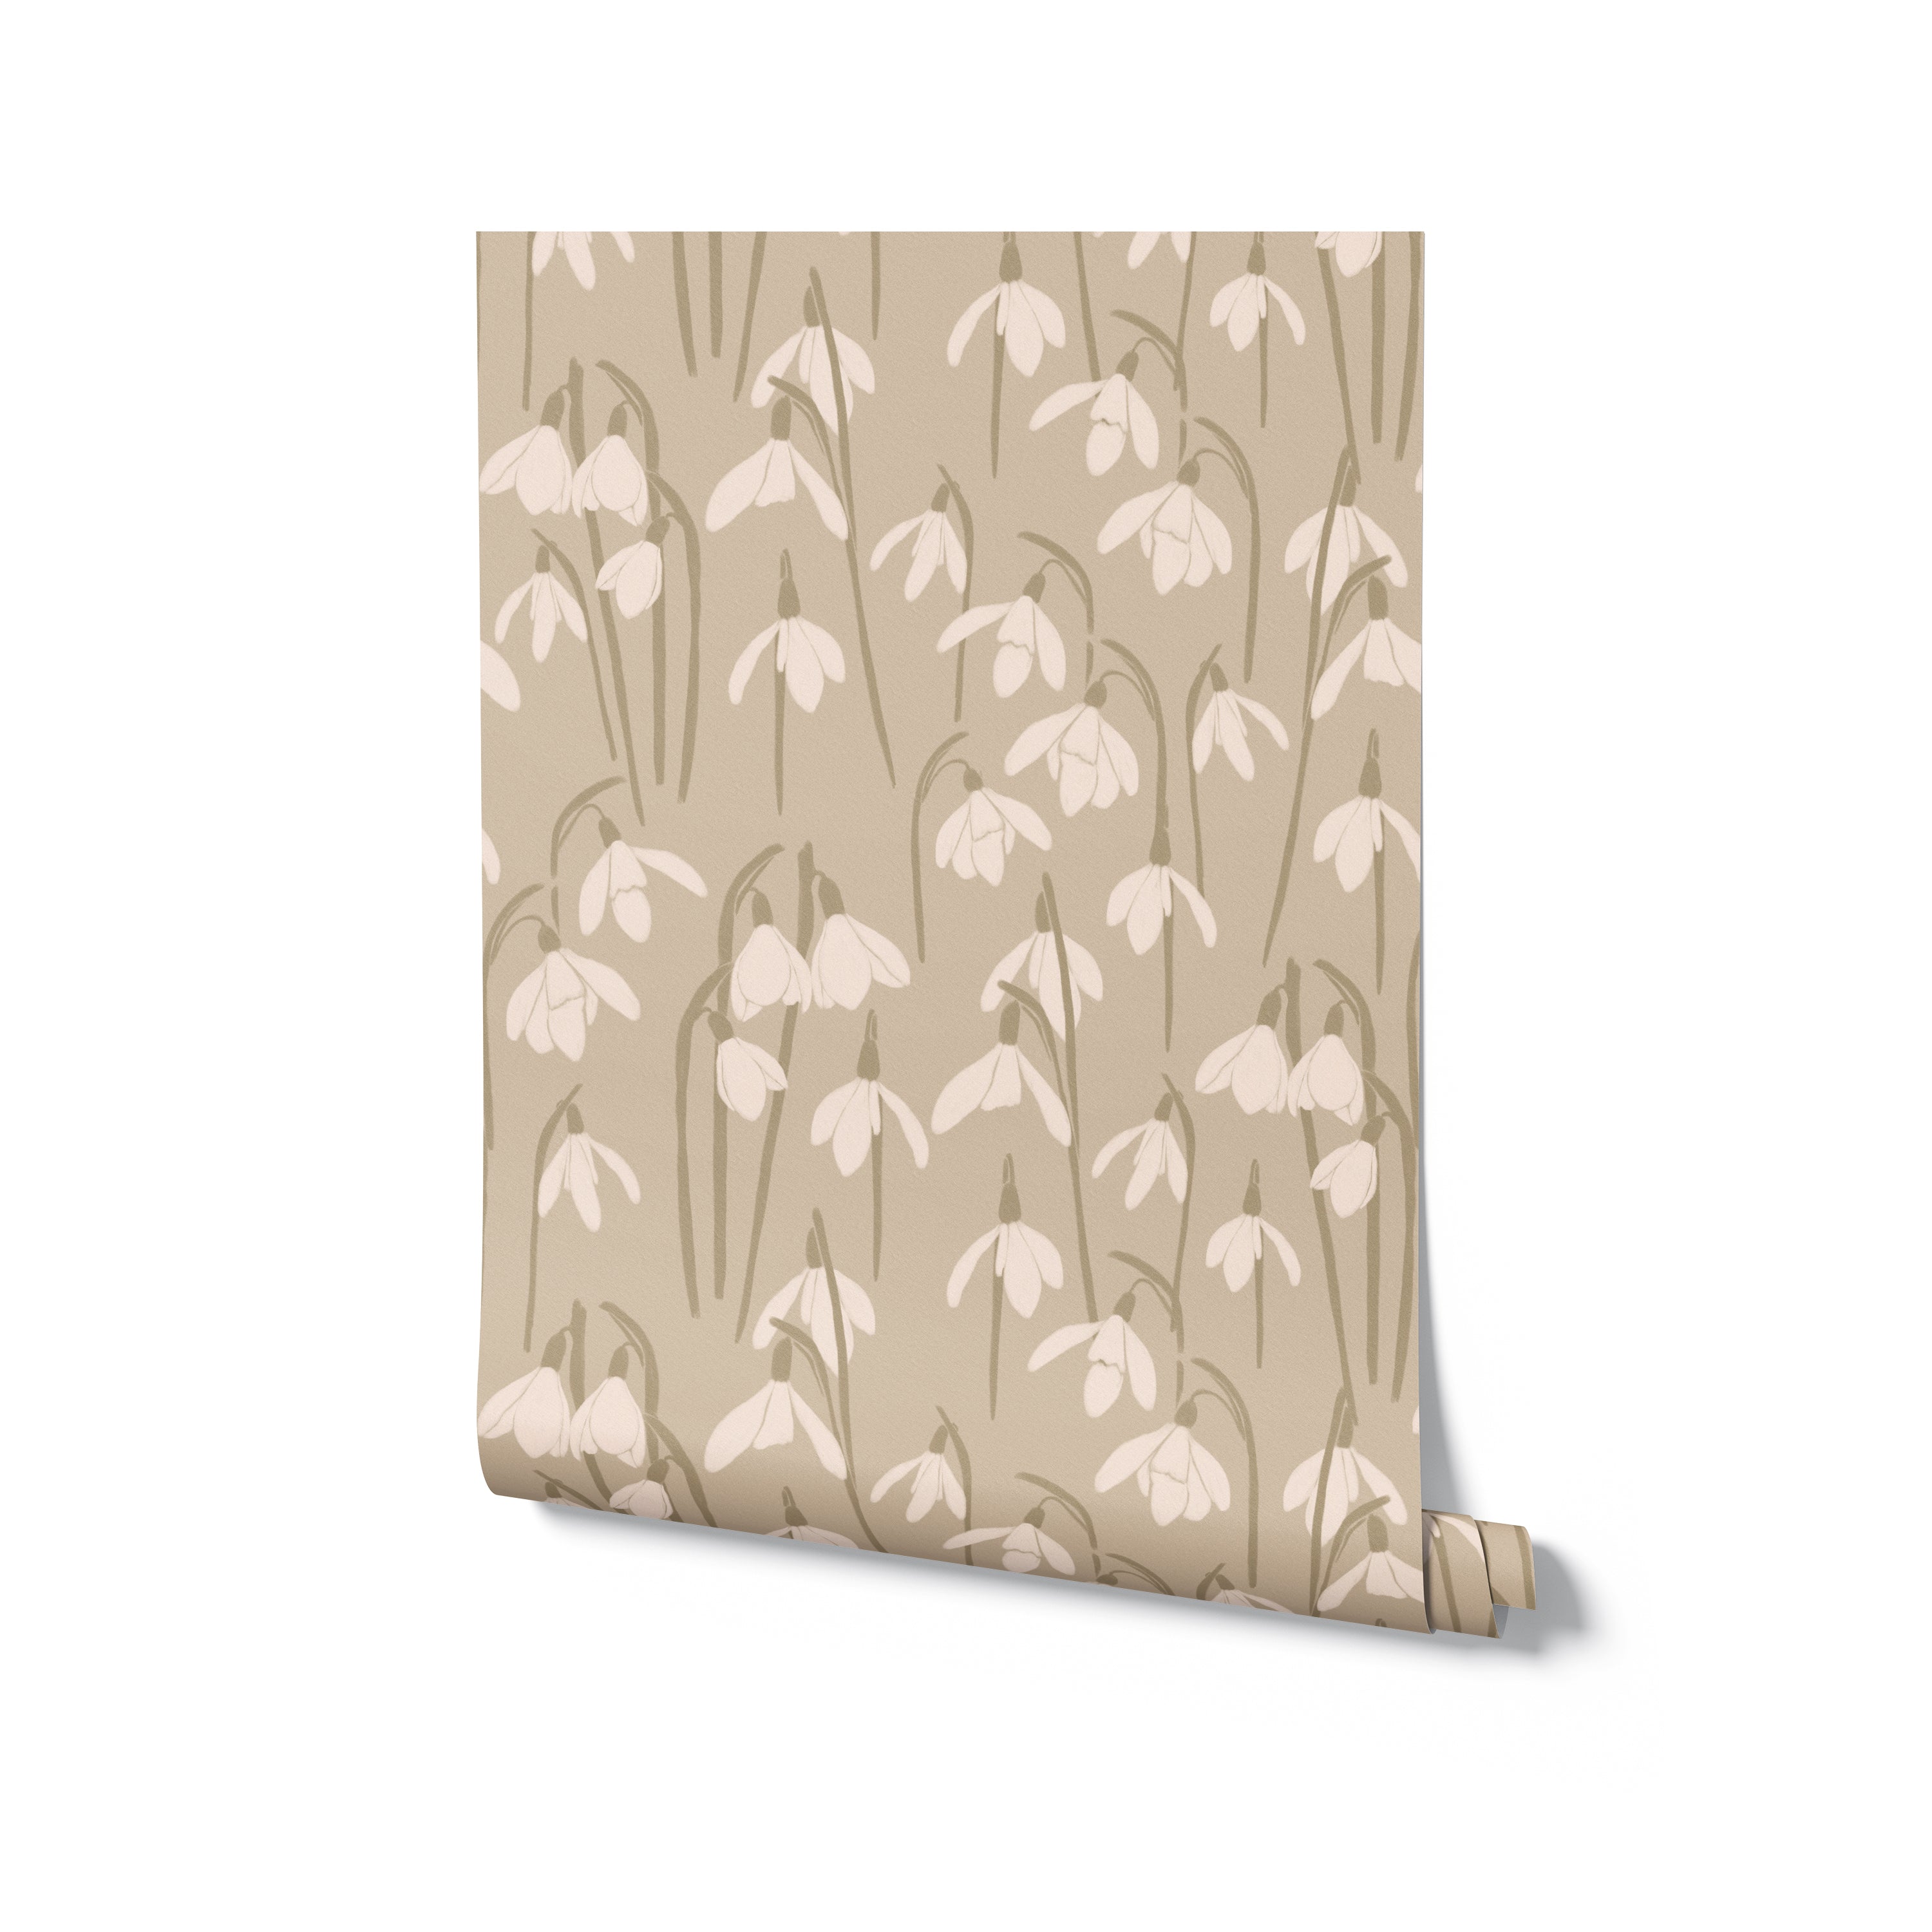 A rolled view of the "Snowdrop Wallpaper - 25," showcasing the intricate design of white snowdrop flowers set against a taupe background. This elegant wallpaper is perfect for adding a light, floral accent to any room, offering both beauty and a sense of peace.